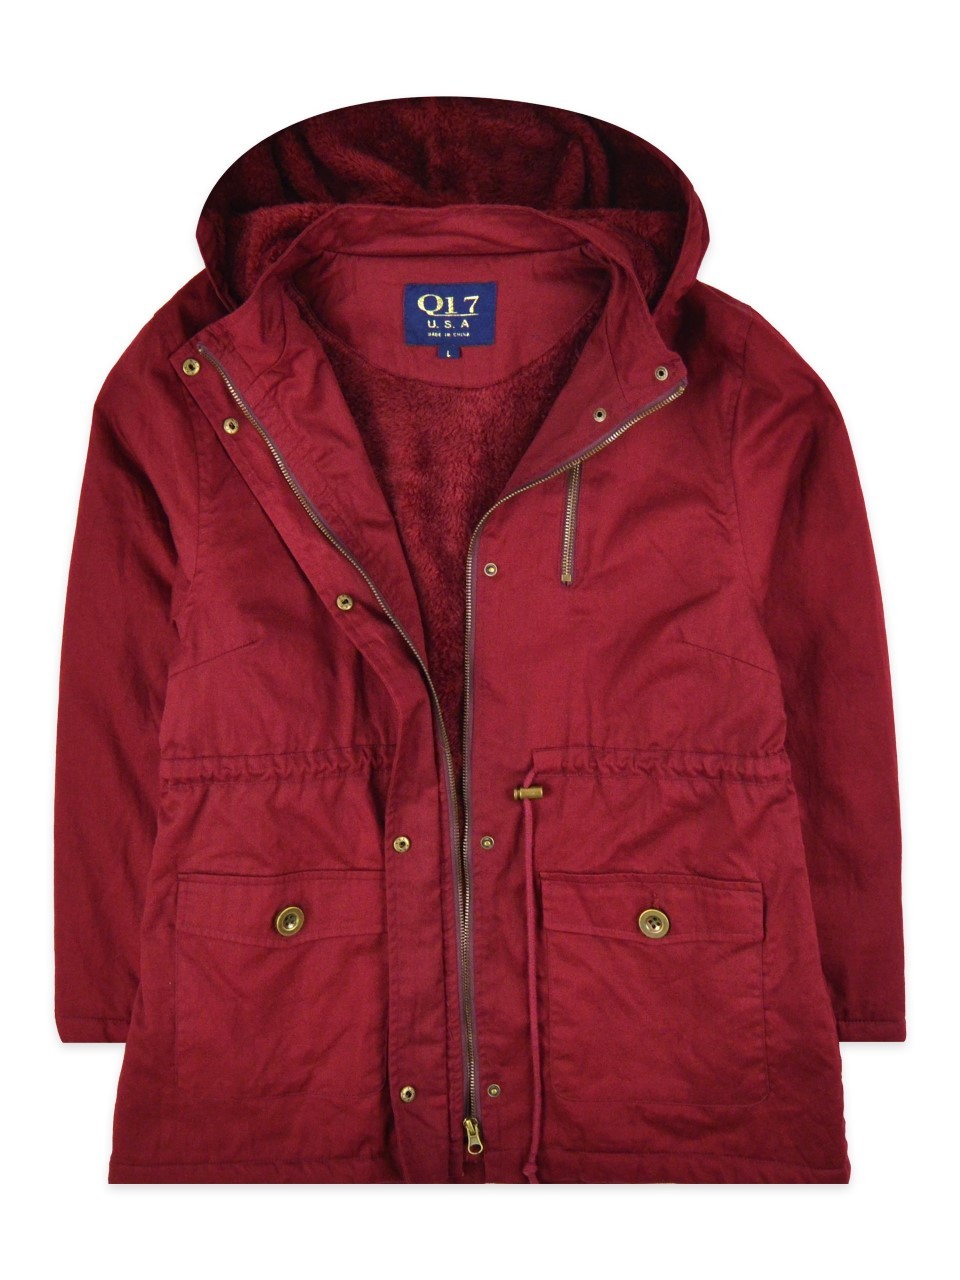 Wholesale Women's Anorak Jacket with Sherpa Lining